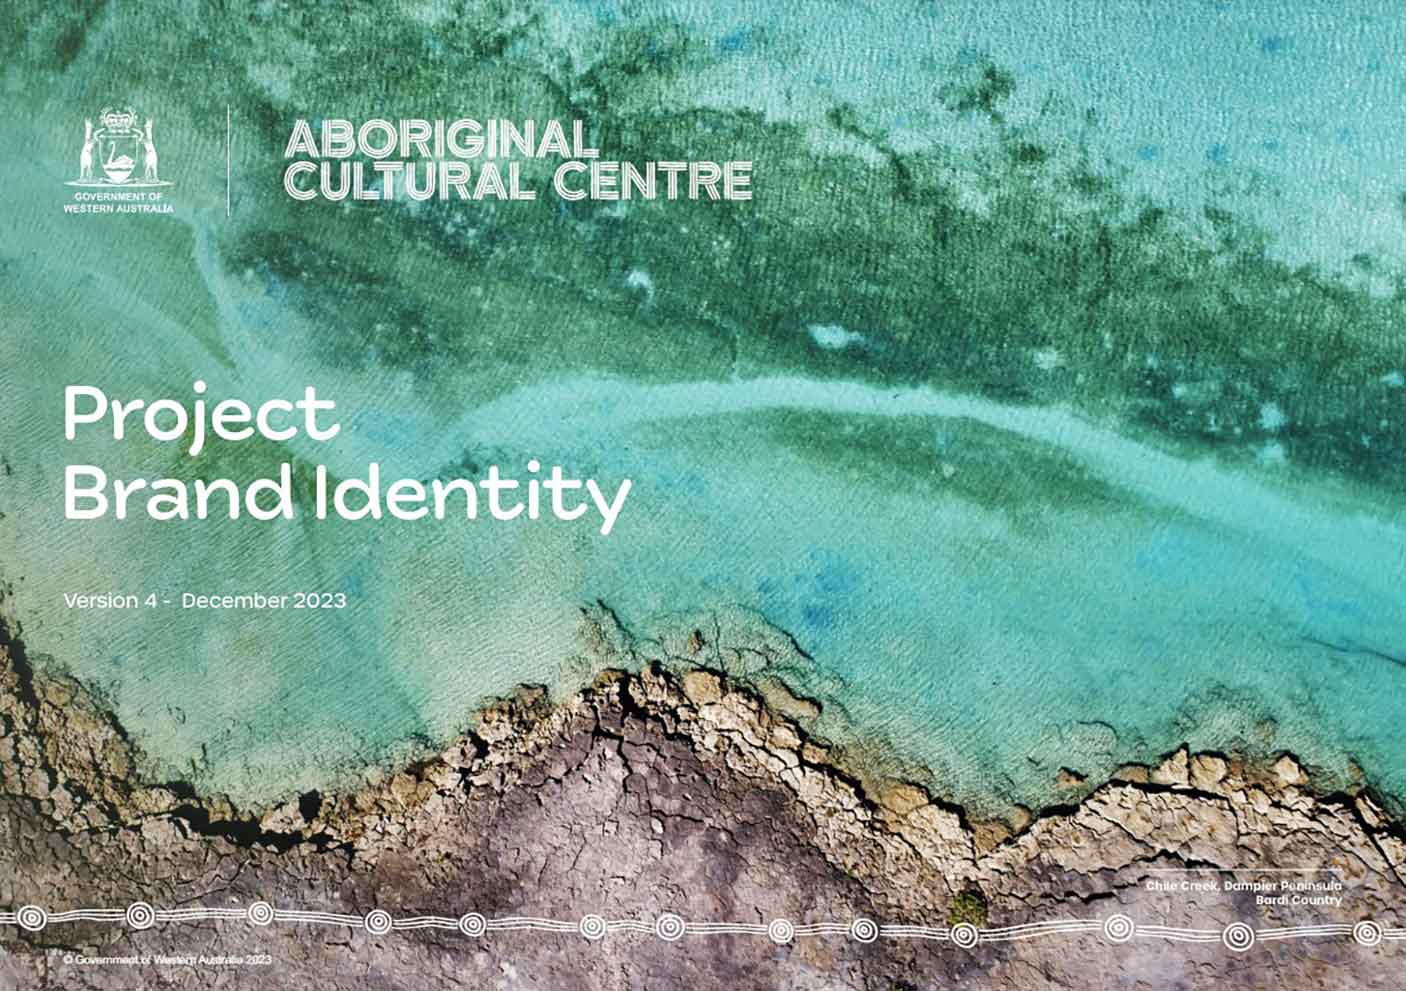 Cover image of the Aboriginal Cultural Centre project brand identity document